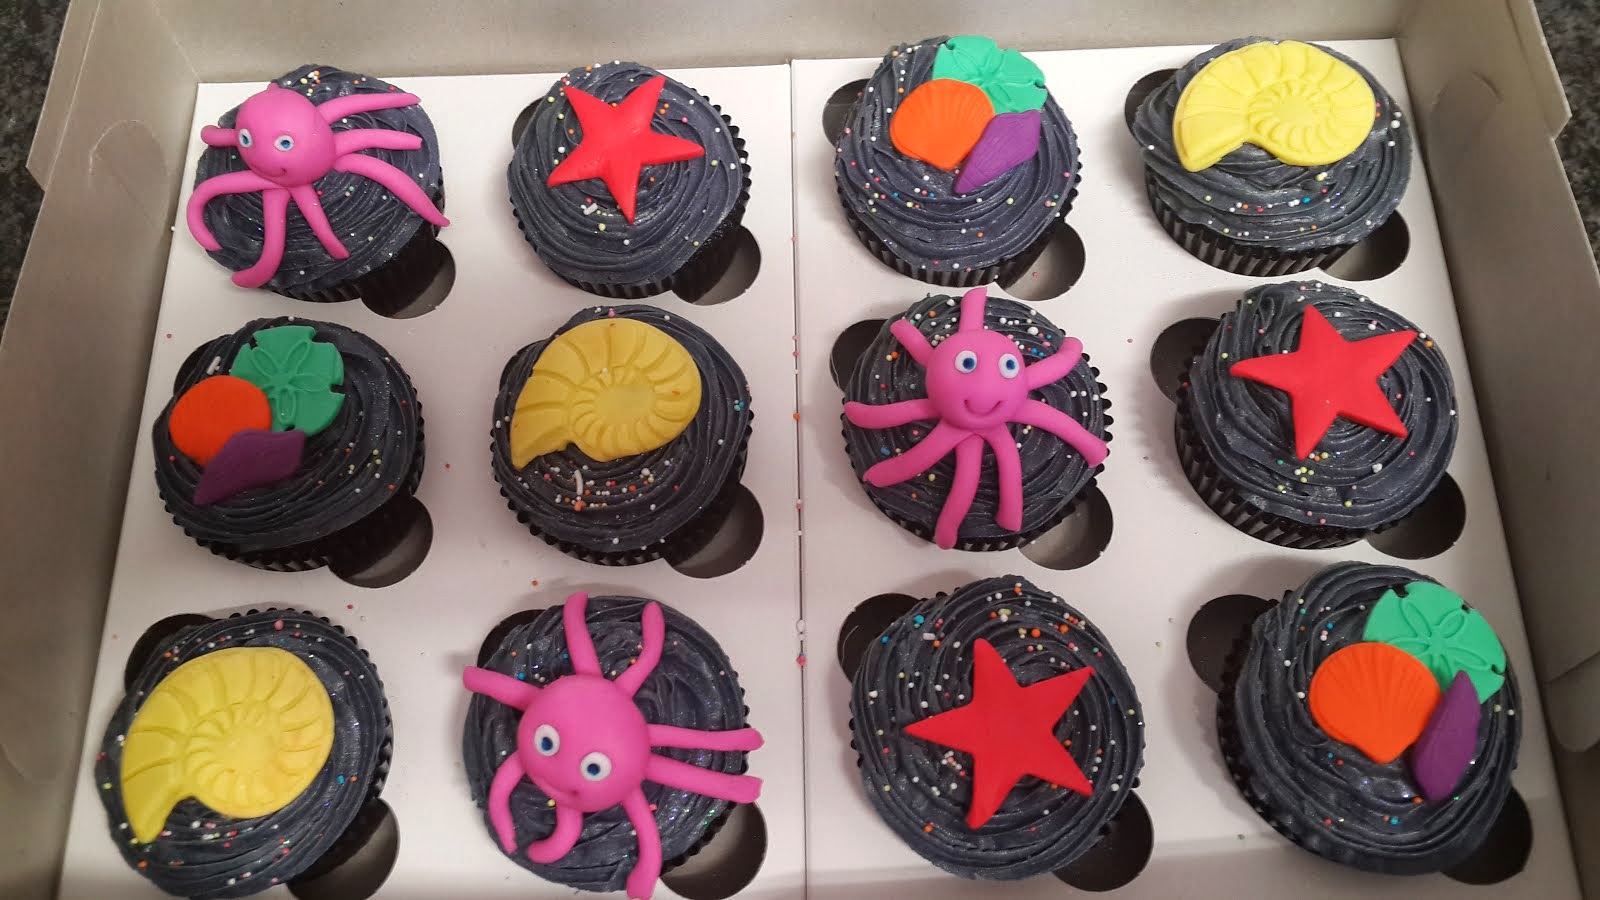 Under the sea Cupcakes